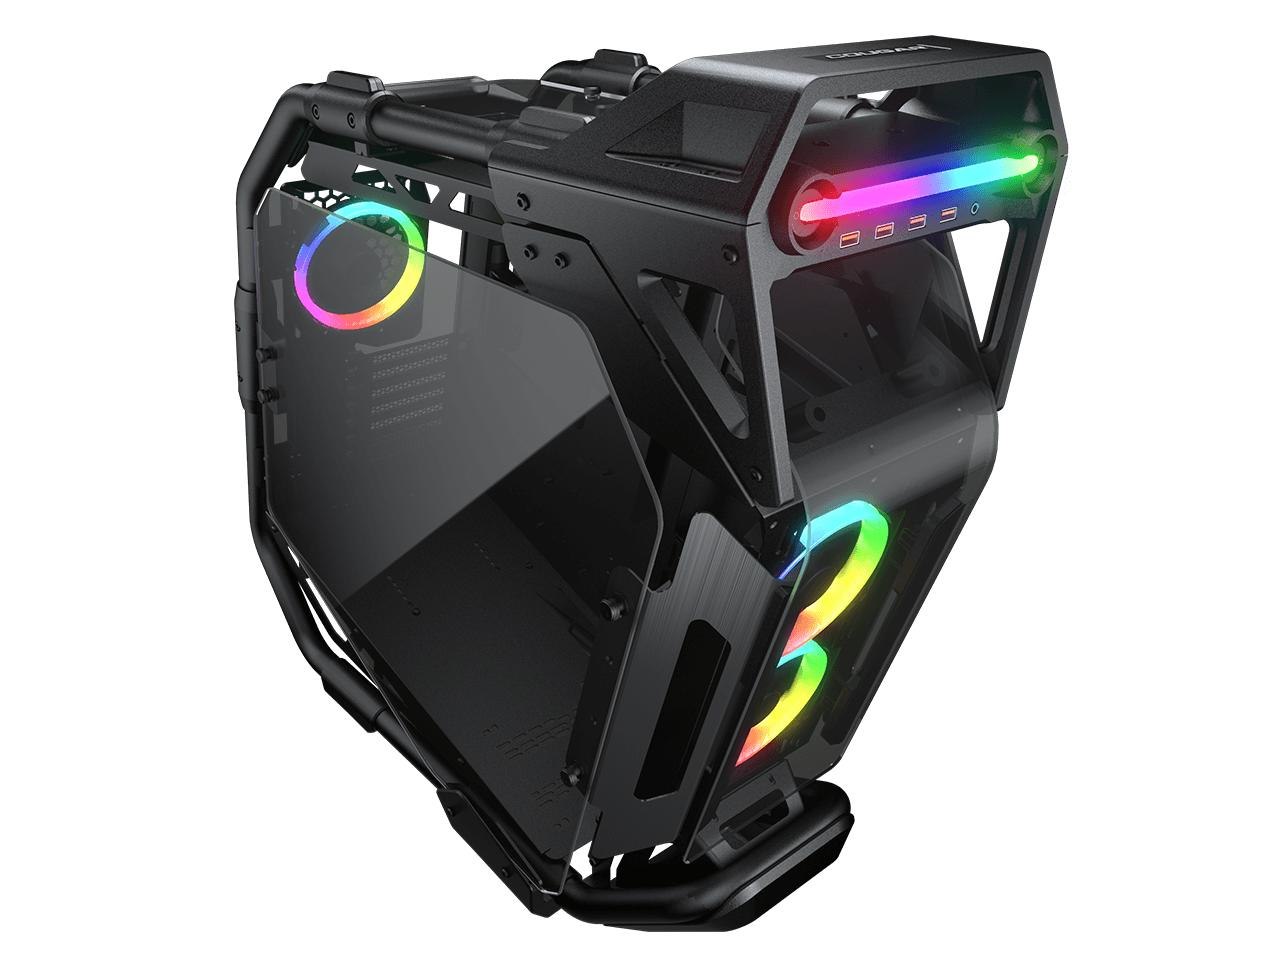 Cougar Cratus Mid Tower RGB Case With Variety Of Customization Features And Convection Dynamics